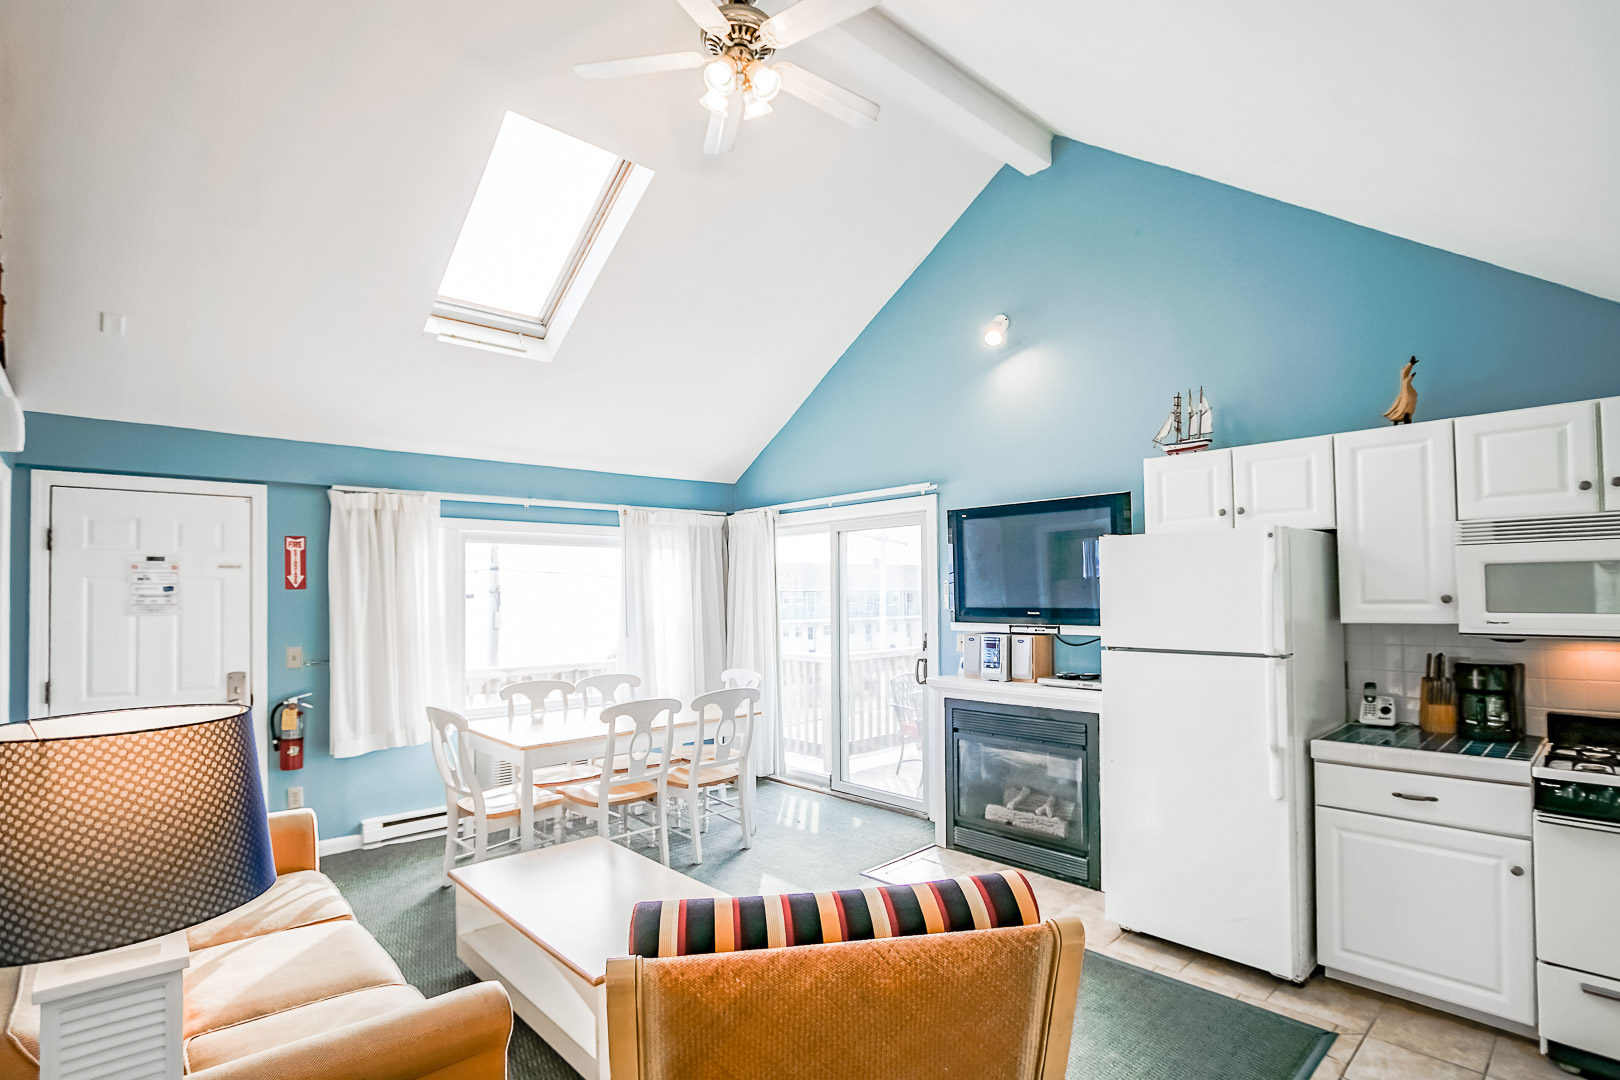 A vibrant living room area with a kitchen at VRI's Seawinds II Resort in Massachusetts.